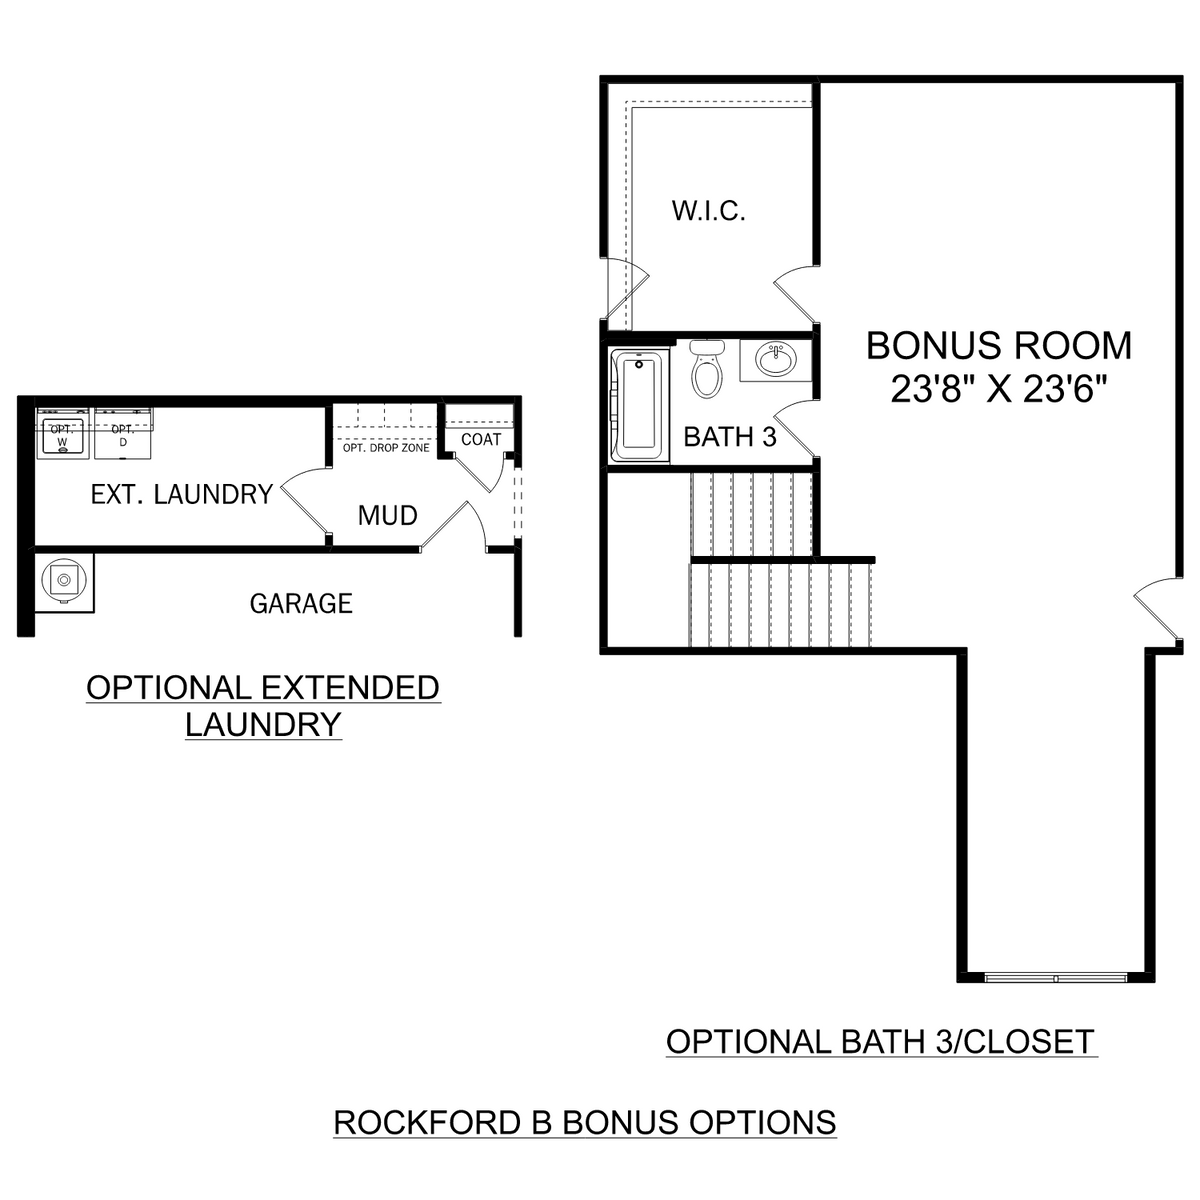 3 - The Rockford B with Bonus buildable floor plan layout in Davidson Homes' River Road Estates community.